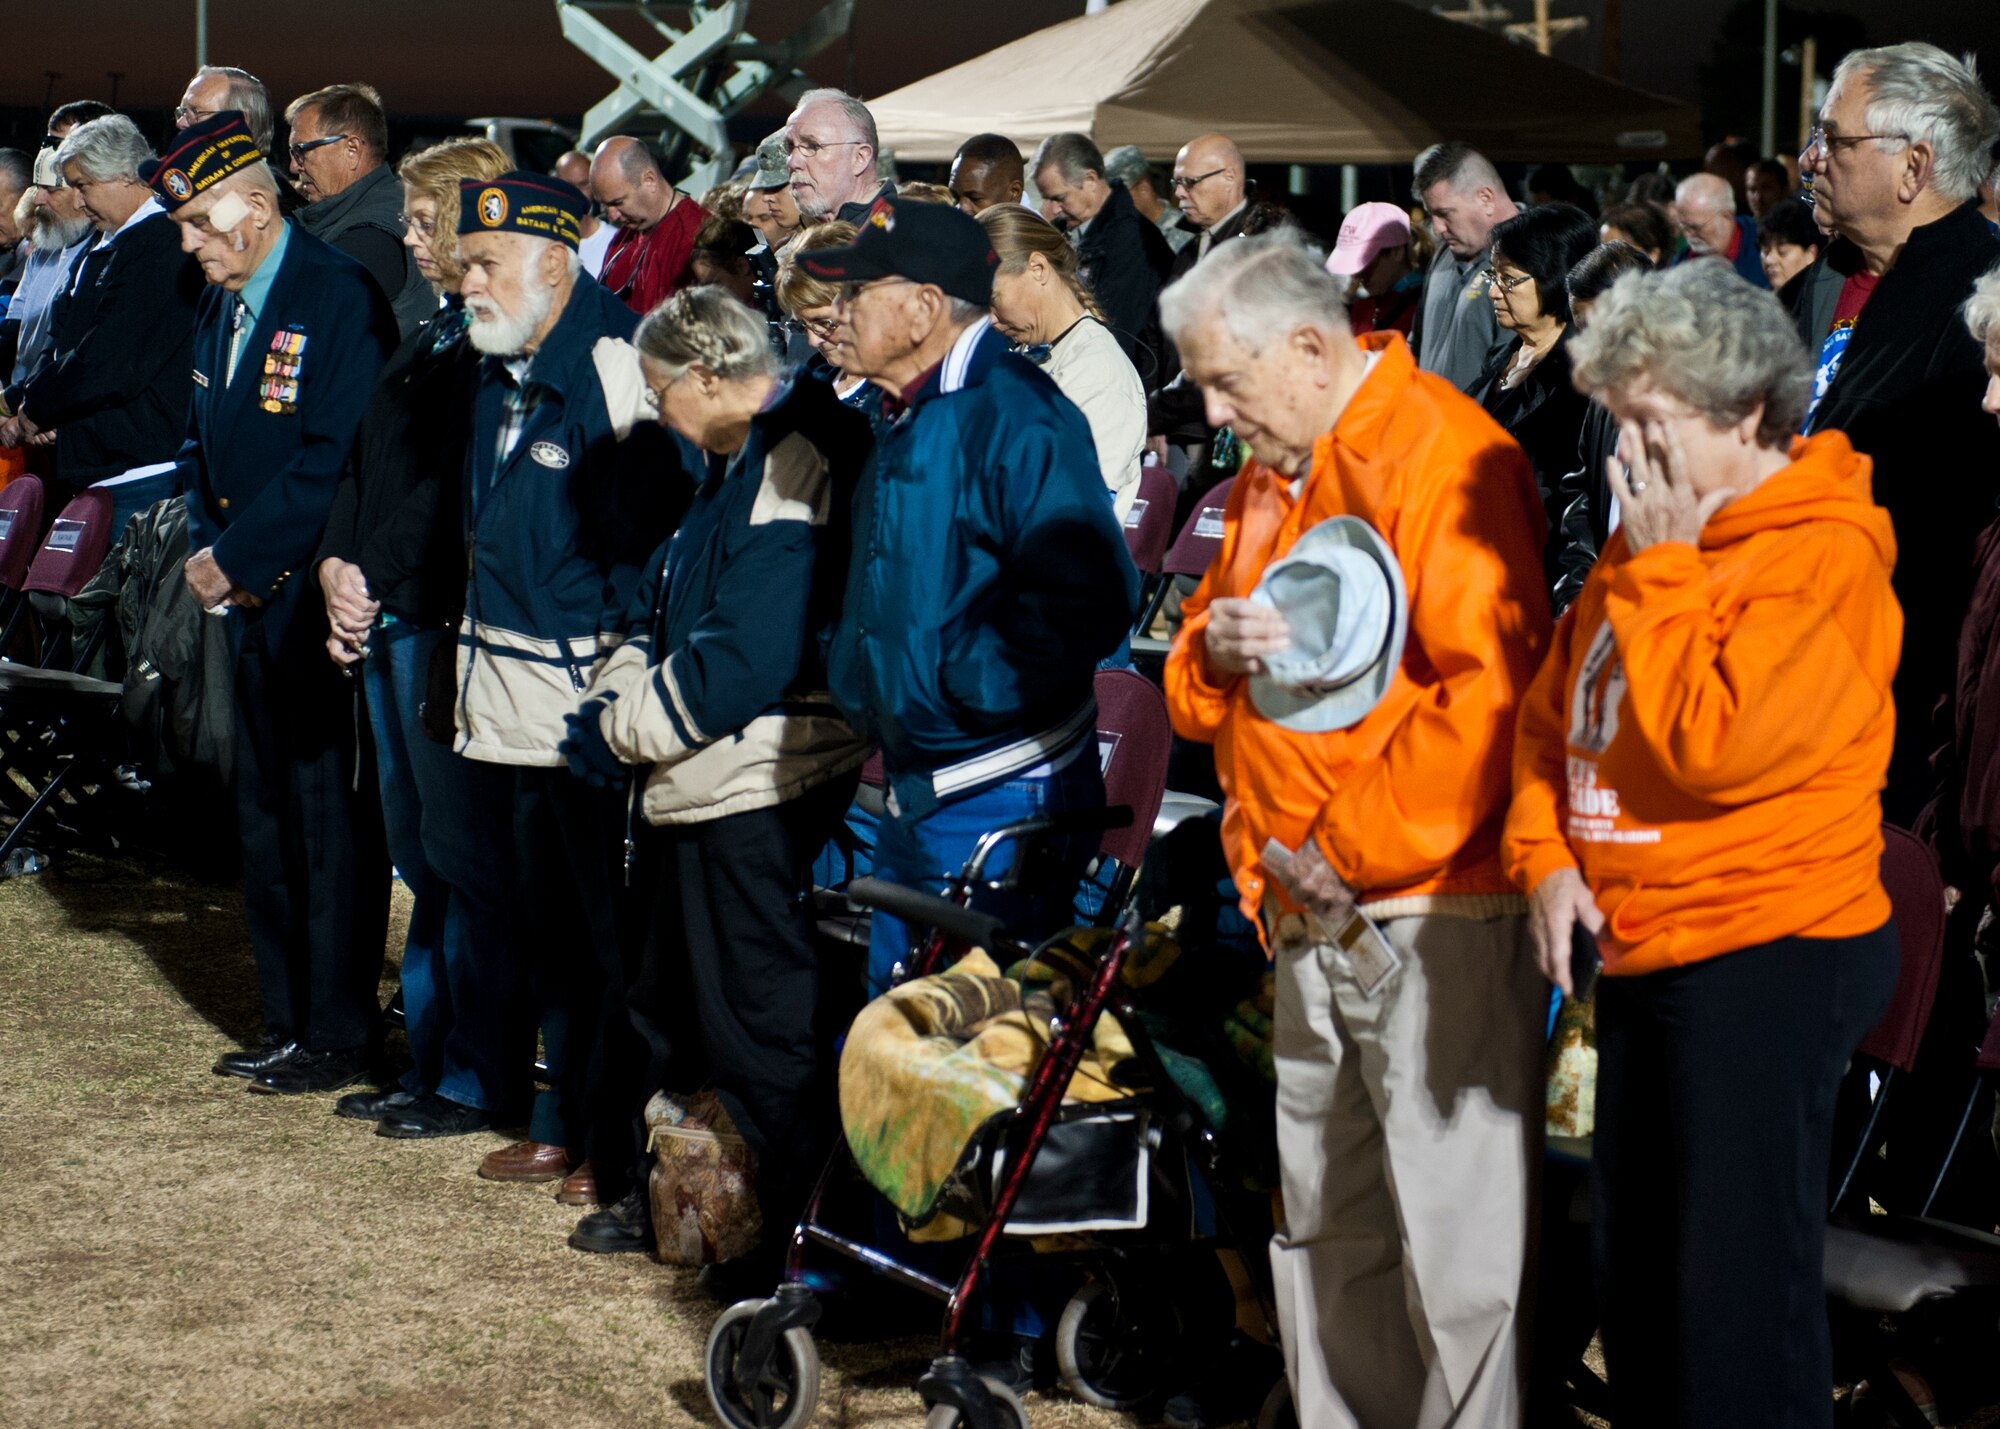 World War II veterans and their families stand as they are honored during the opening ceremony of the 24th annual Bataan Memorial Death March at White Sands Missile Range, N.M., March 17. More than 5,800 people who were from across the world participated in the 26.2-milememorial marathon to honor the 76,000 prisoners of war forced to endure marching nearly 80 miles under brutal conditions during World War II.  Many of the survivors return year after year to participate in the event and shake the hands with those who finish the 26-mile loop through the desert.  (U.S.  Air Force photo by Airman 1st Class Daniel E. Liddicoet/Released)